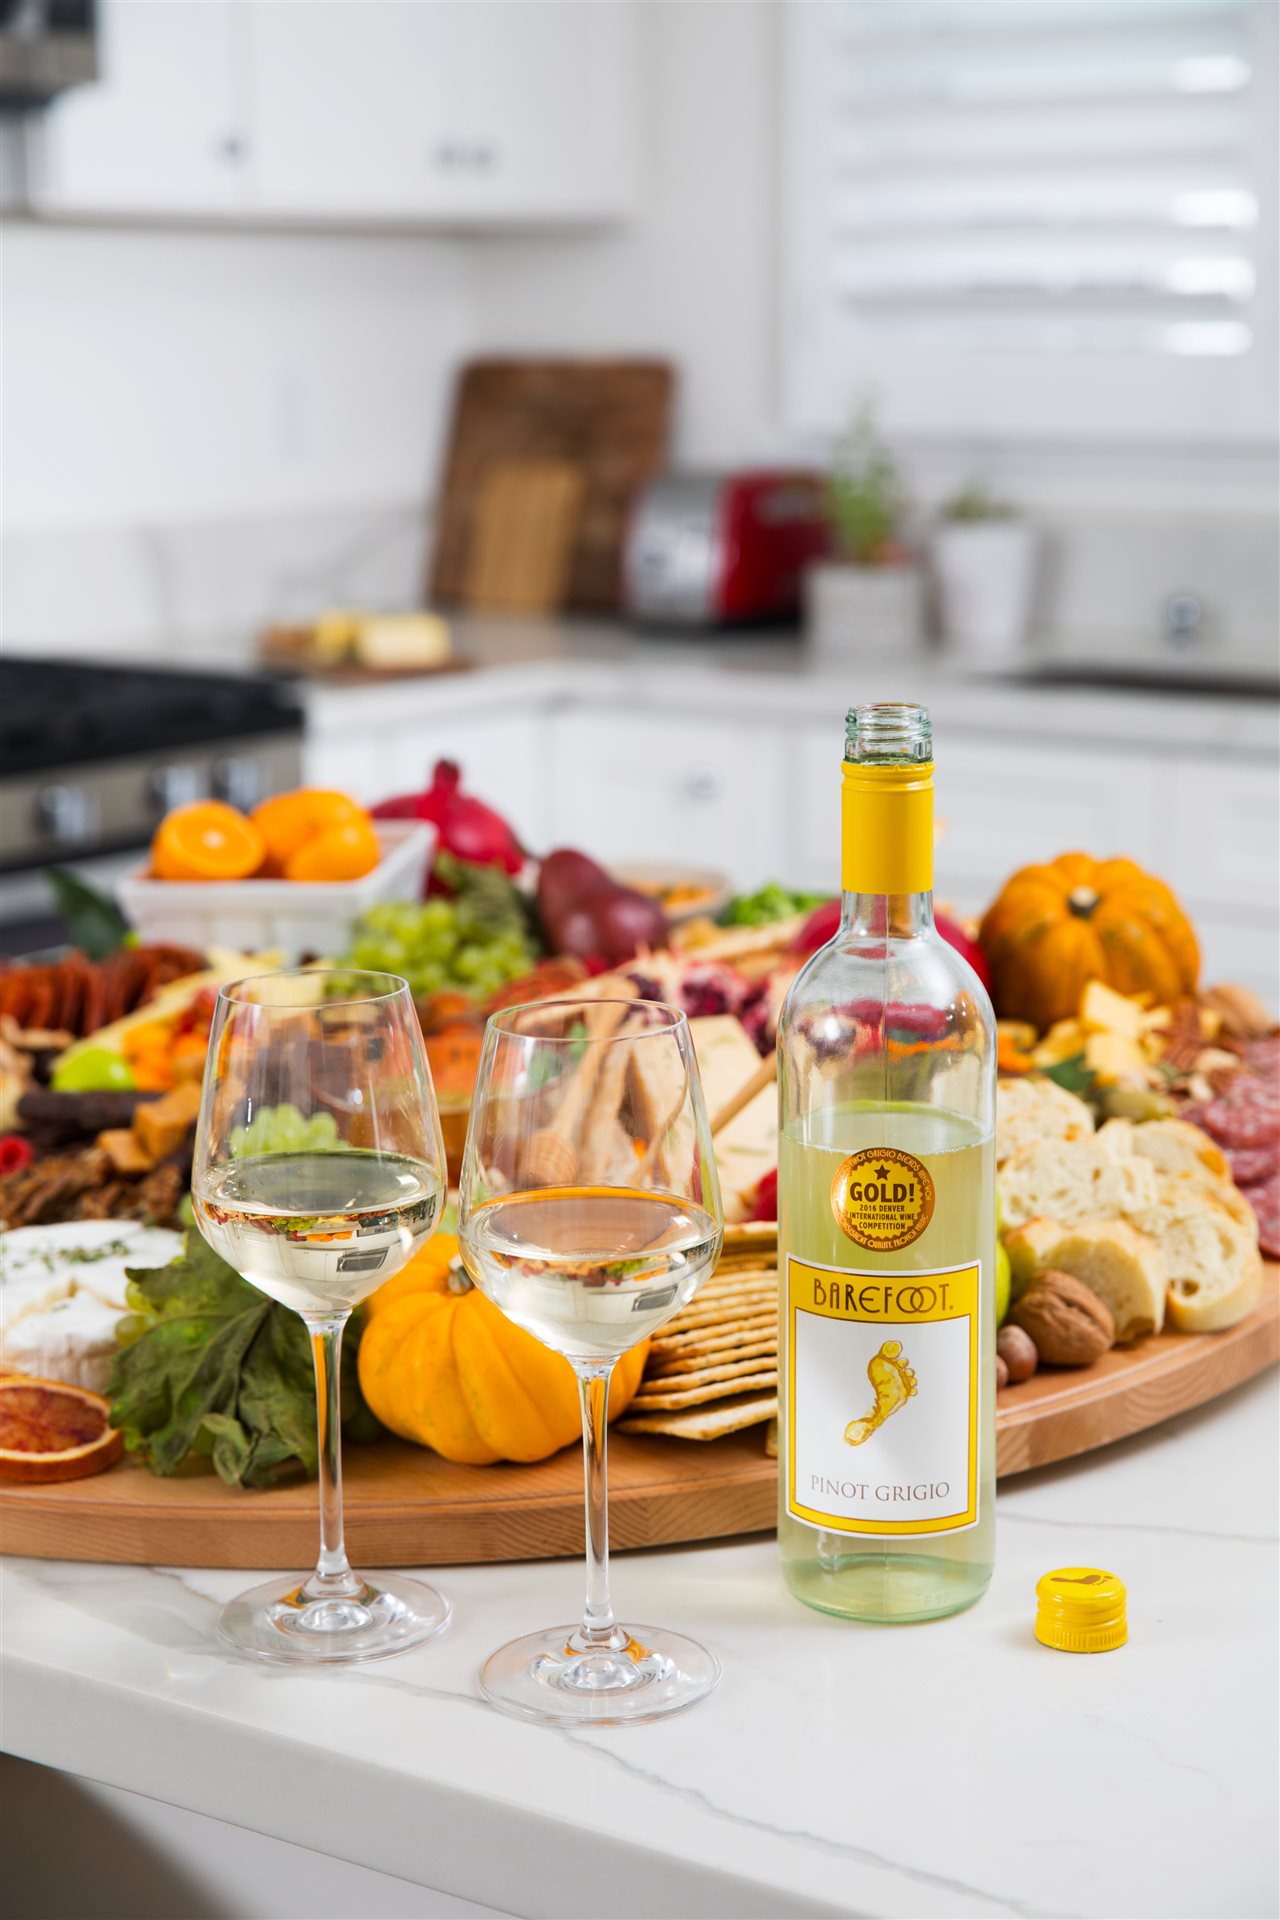 A bottle of barefoot wine and two filled glasses by a huge snack tray.